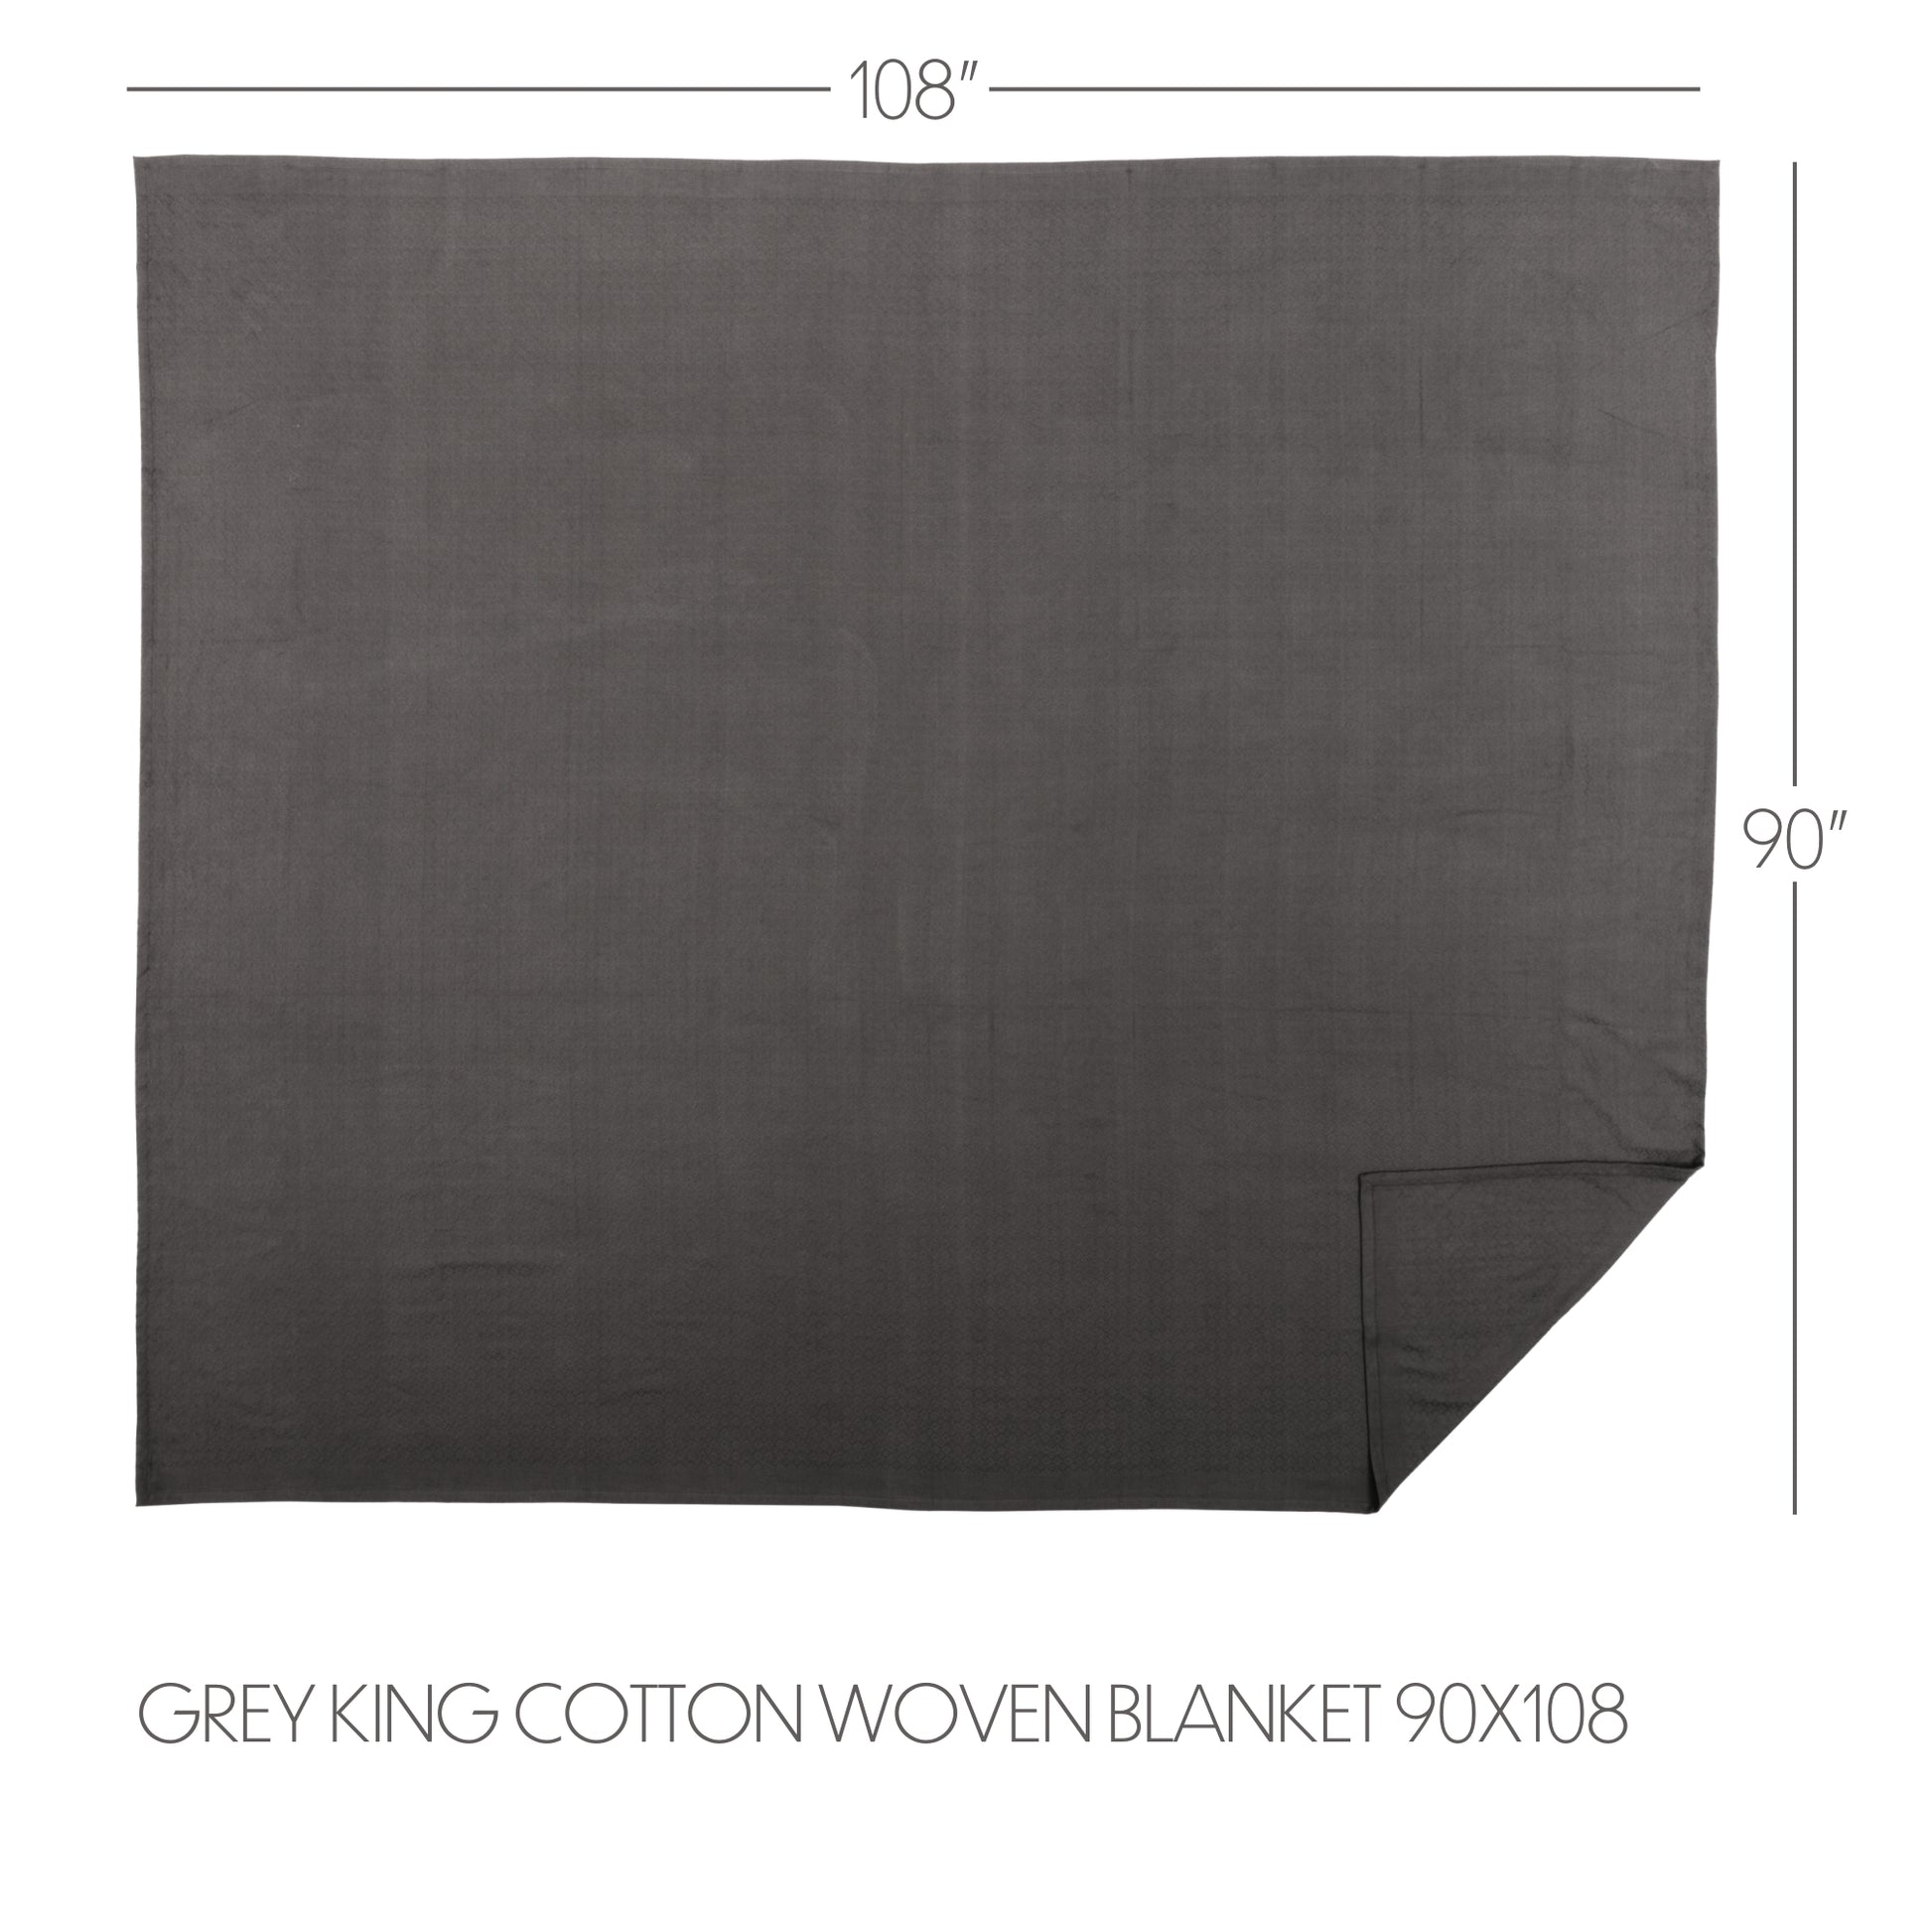 43068-Serenity-Grey-King-Cotton-Woven-Blanket-90x108-image-5